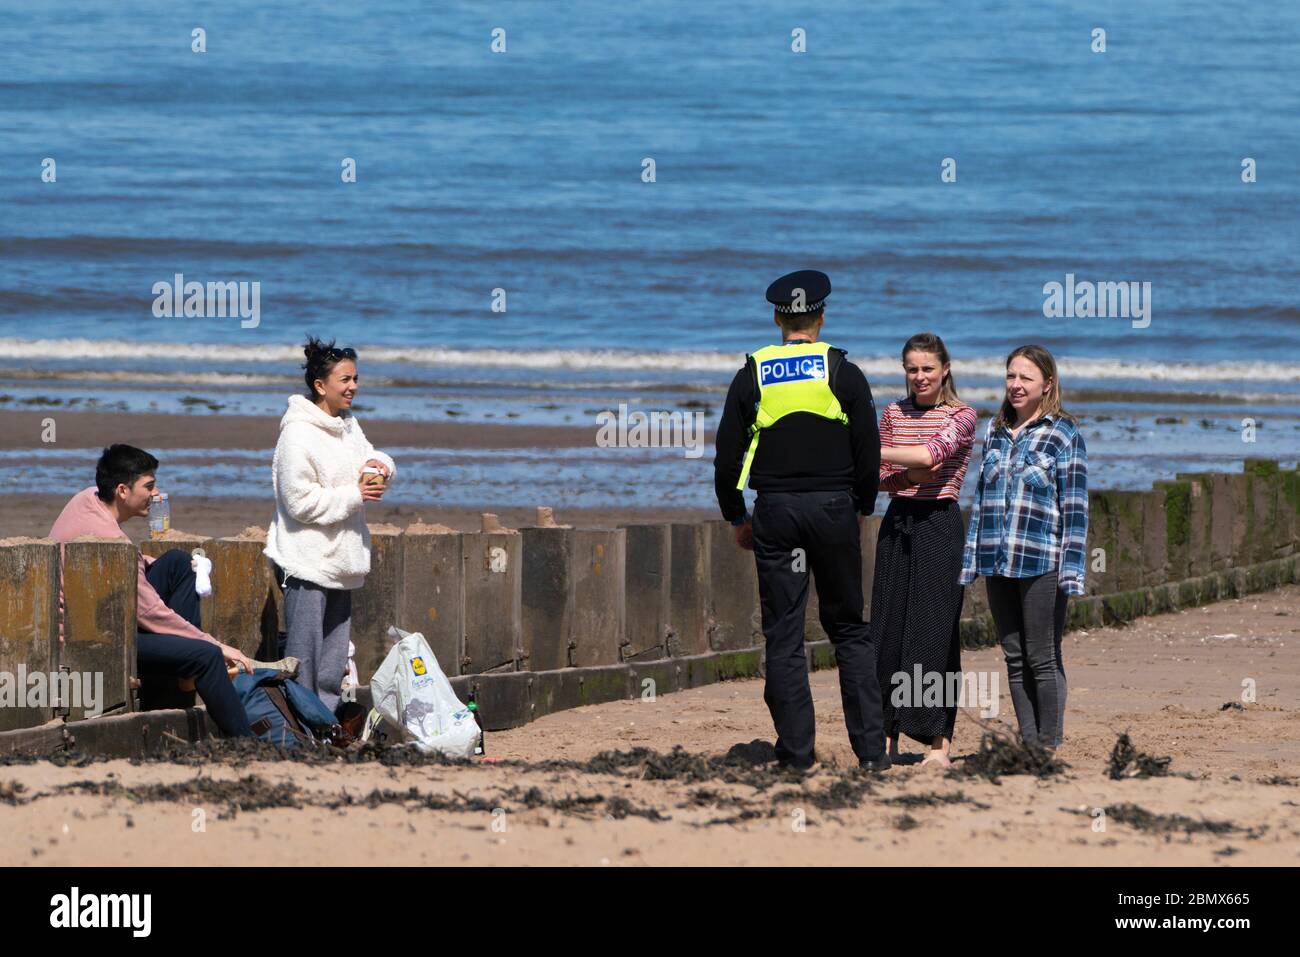 Portobello, Scotland, UK. 11 May 2020. Police patrolling promenade and beach at Portobello this afternoon in warm sunny weather. They spoke to the public who were sitting on the beach or on sea wall asking them to keep moving. Iain Masterton/Alamy Live News Stock Photo